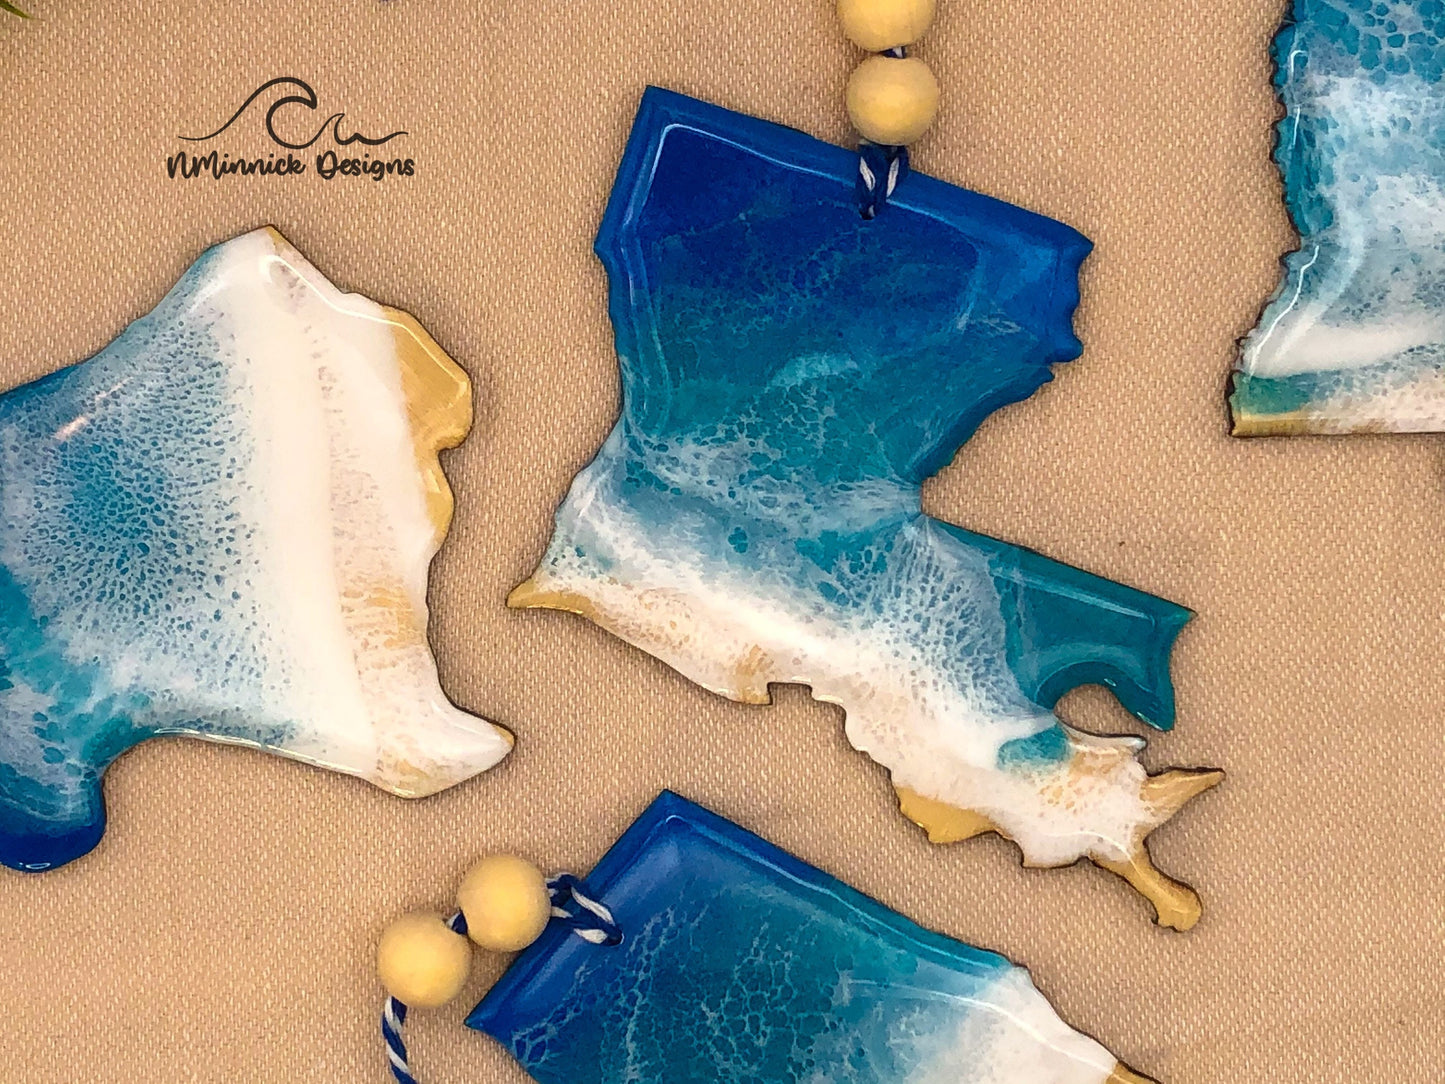 4 to 4.5 inch laser cut ornament in shape of Louisiana, coated in blue, teal and white resin to create a one of a kind beach scene. Finished with bakers twine and two wooden beads.